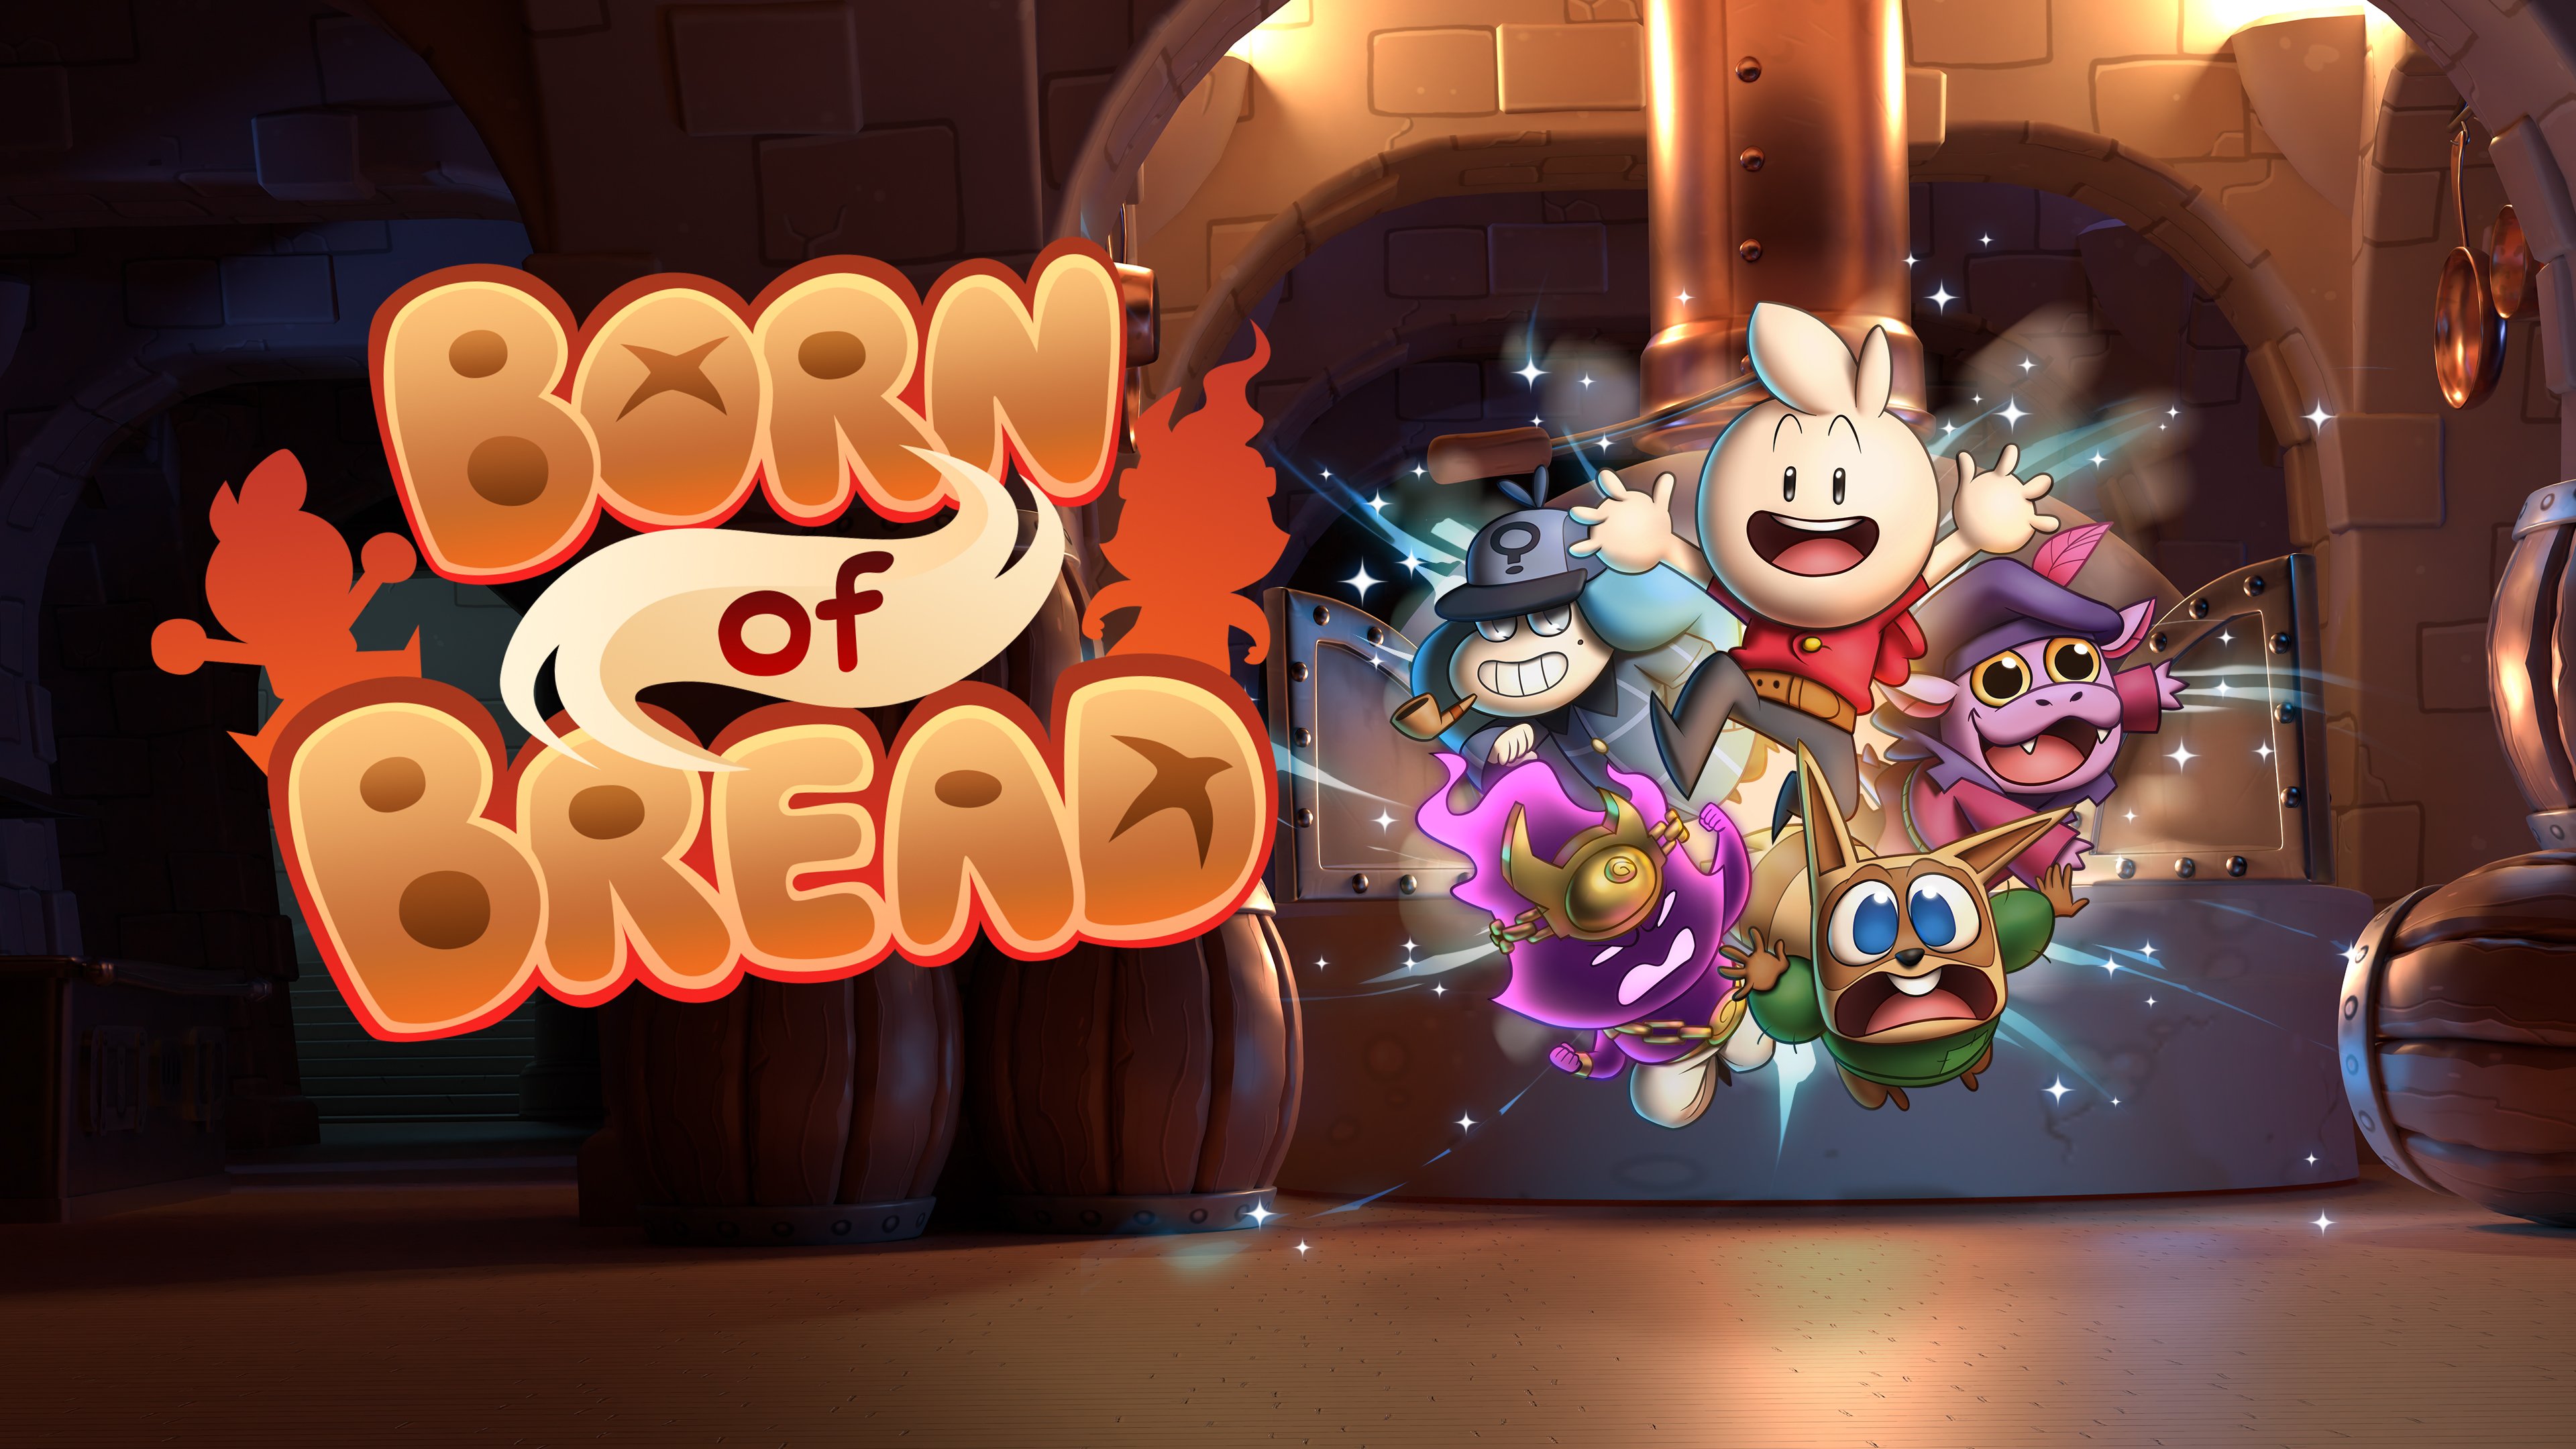 #
      Born of Bread launches in summer 2023